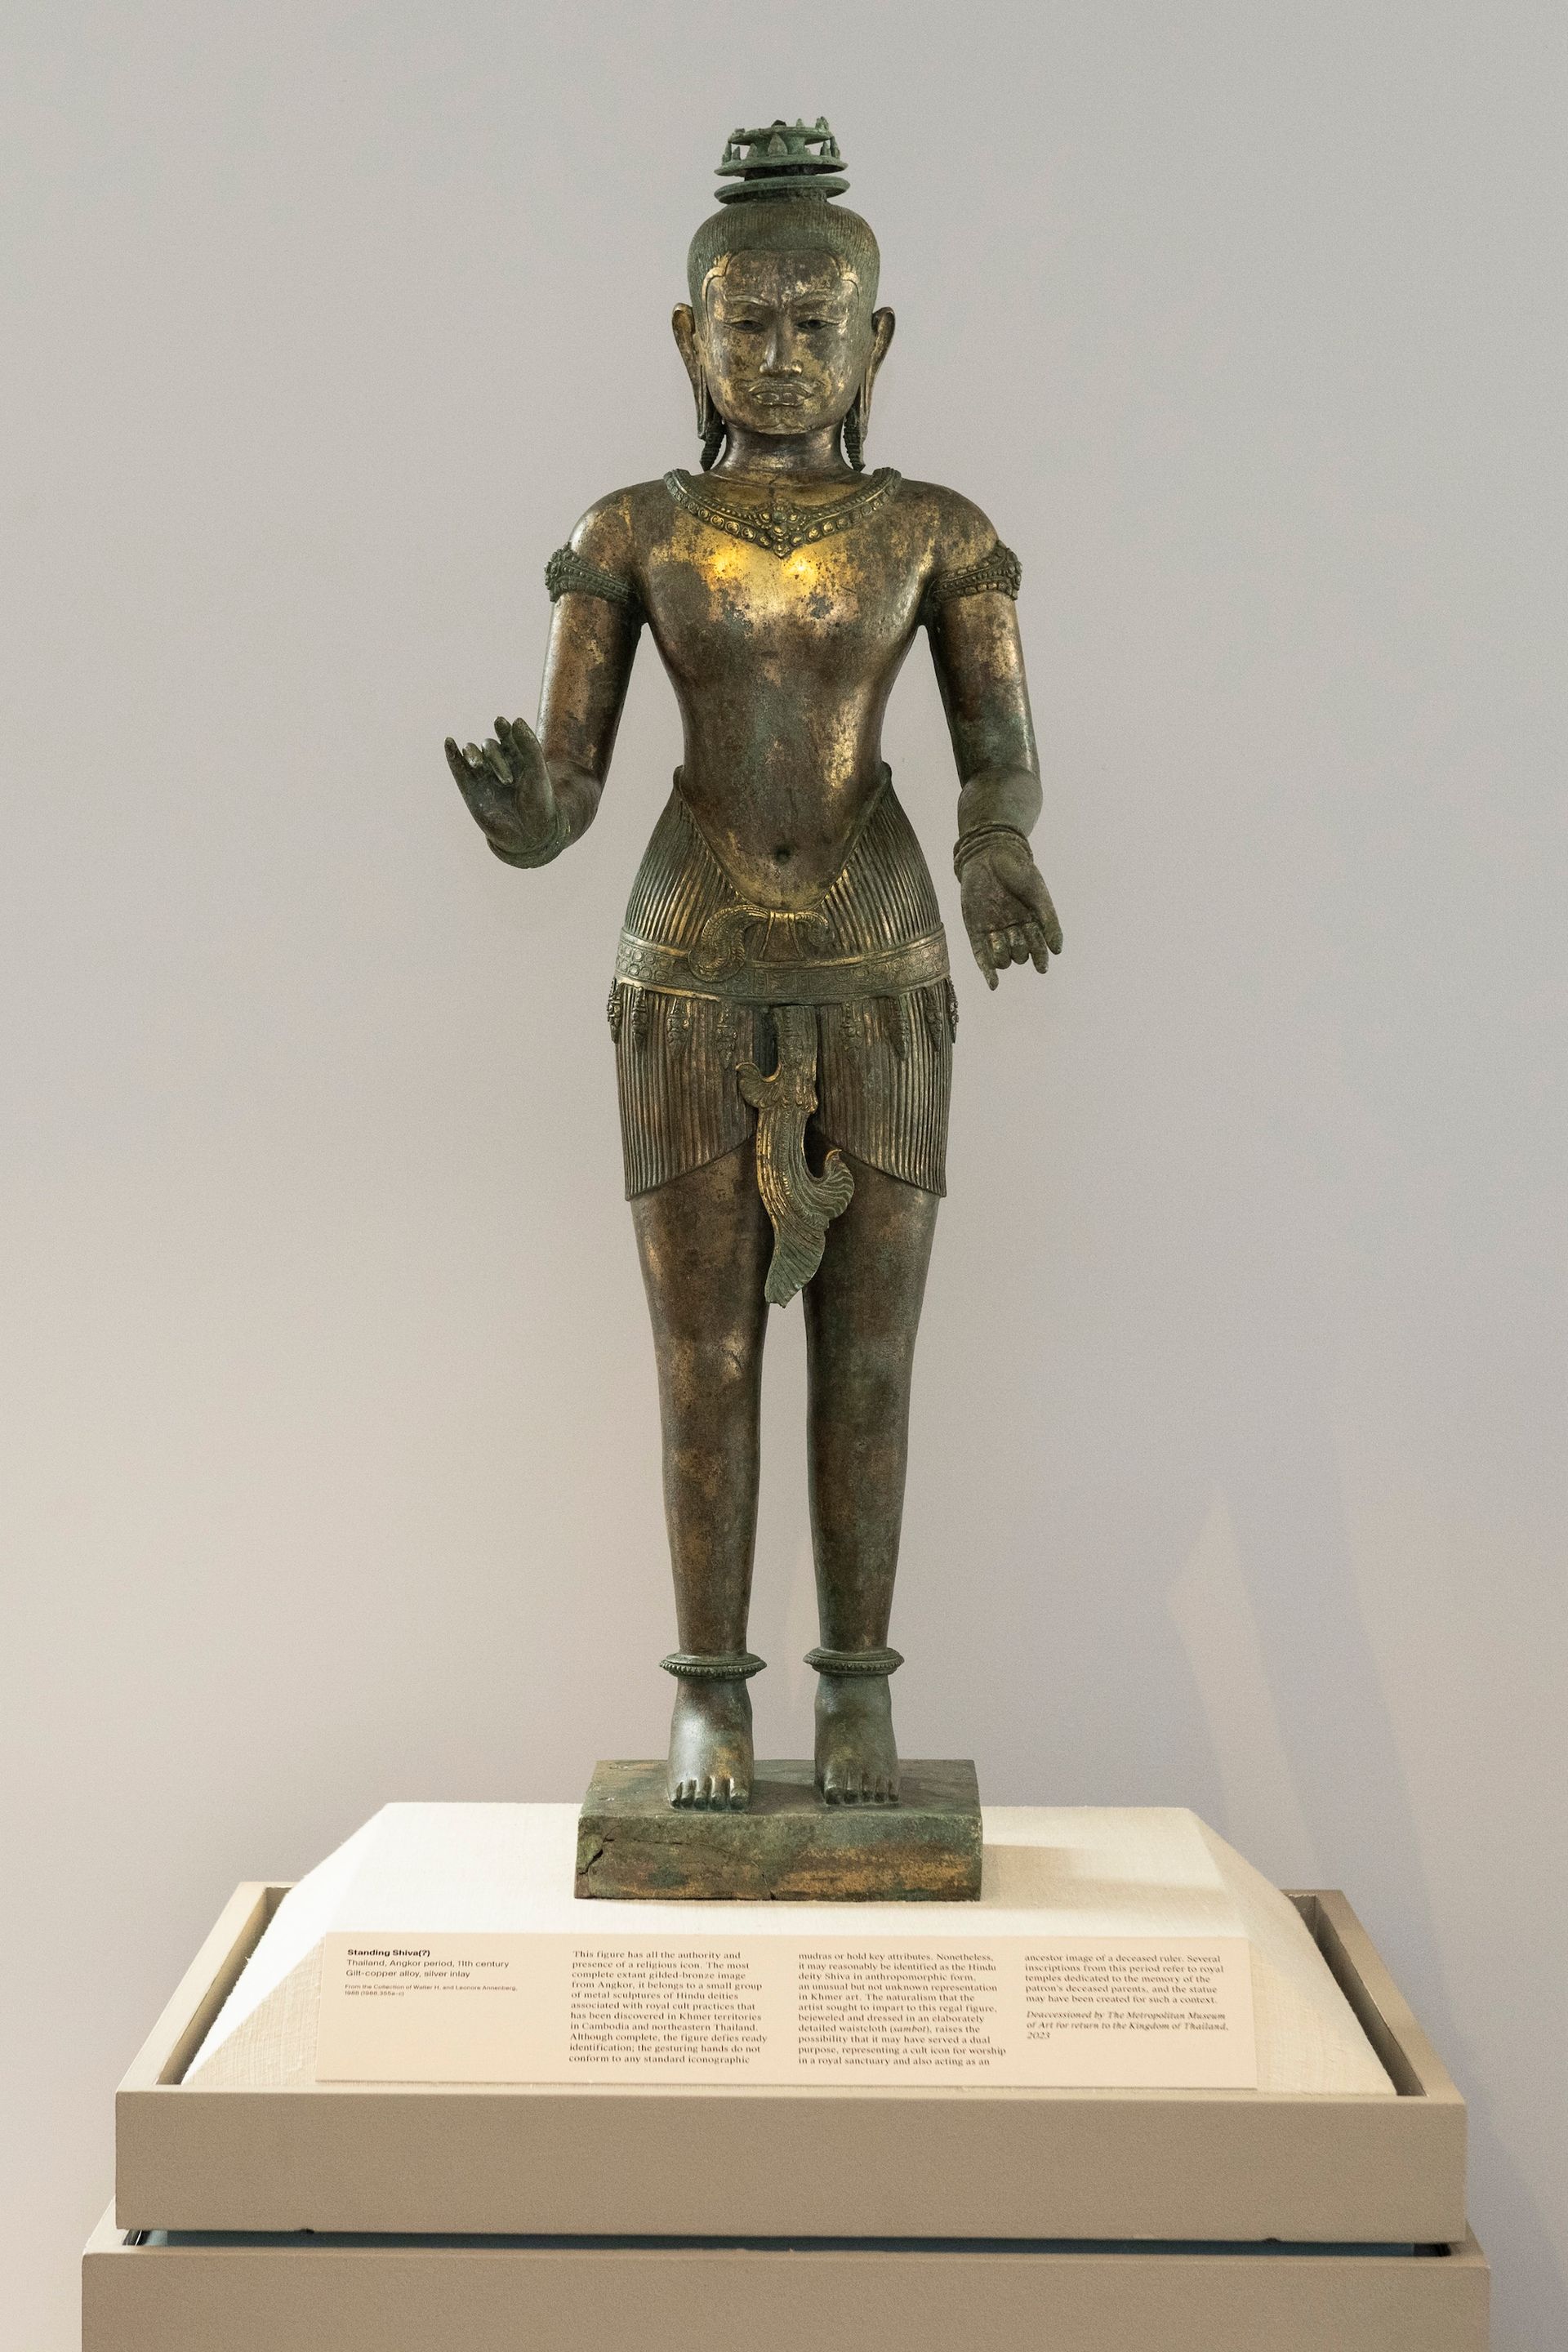 Met Museum signs cultural-property agreement with Thailand and returns two statues - Art Newspaper